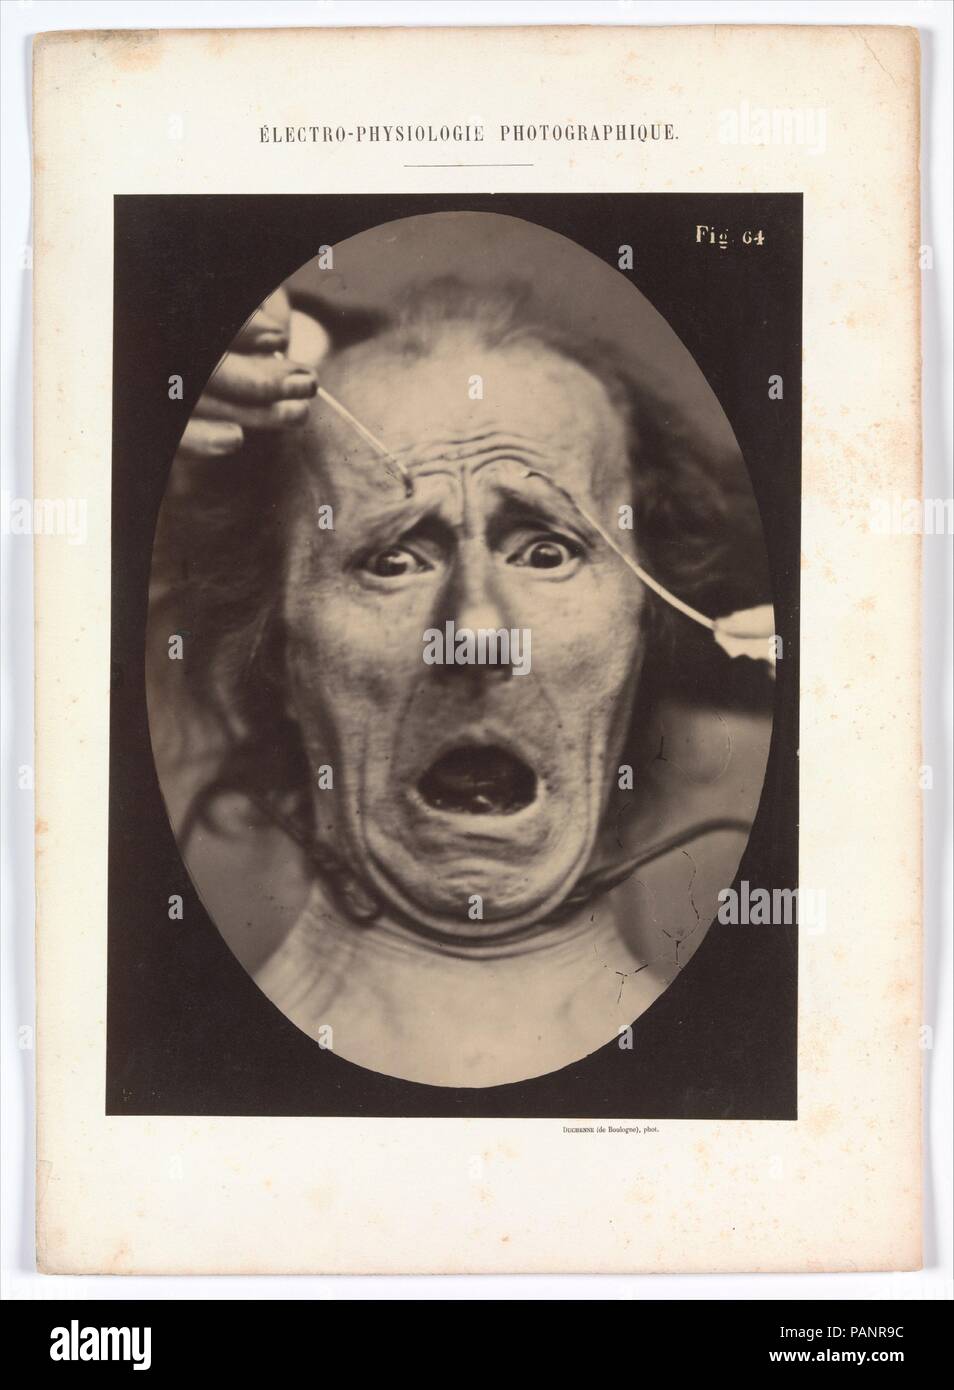 Electro-Physiologie, Figure 64. Artist: Guillaume-Benjamin-Amand Duchenne de Boulogne (French, 1806-1875); Adrien Tournachon (French, 1825-1903). Dimensions: Image: 29.8 x 22.3 cm (11 3/4 x 8 3/4 in.)  Mount: 40.1 x 28.5 cm (15 13/16 x 11 1/4 in.). Date: 1854-56, printed 1862.  In compiling a scientific treatise to aid artists, the physiologist Duchenne de Boulogne used electrical stimulation of the facial muscles to elicit expressions of the principal emotions. Wanting his transcriptions to be exact, he collaborated with Adrien Tournachon (brother of the famous Nadar), a photographer who spec Stock Photo